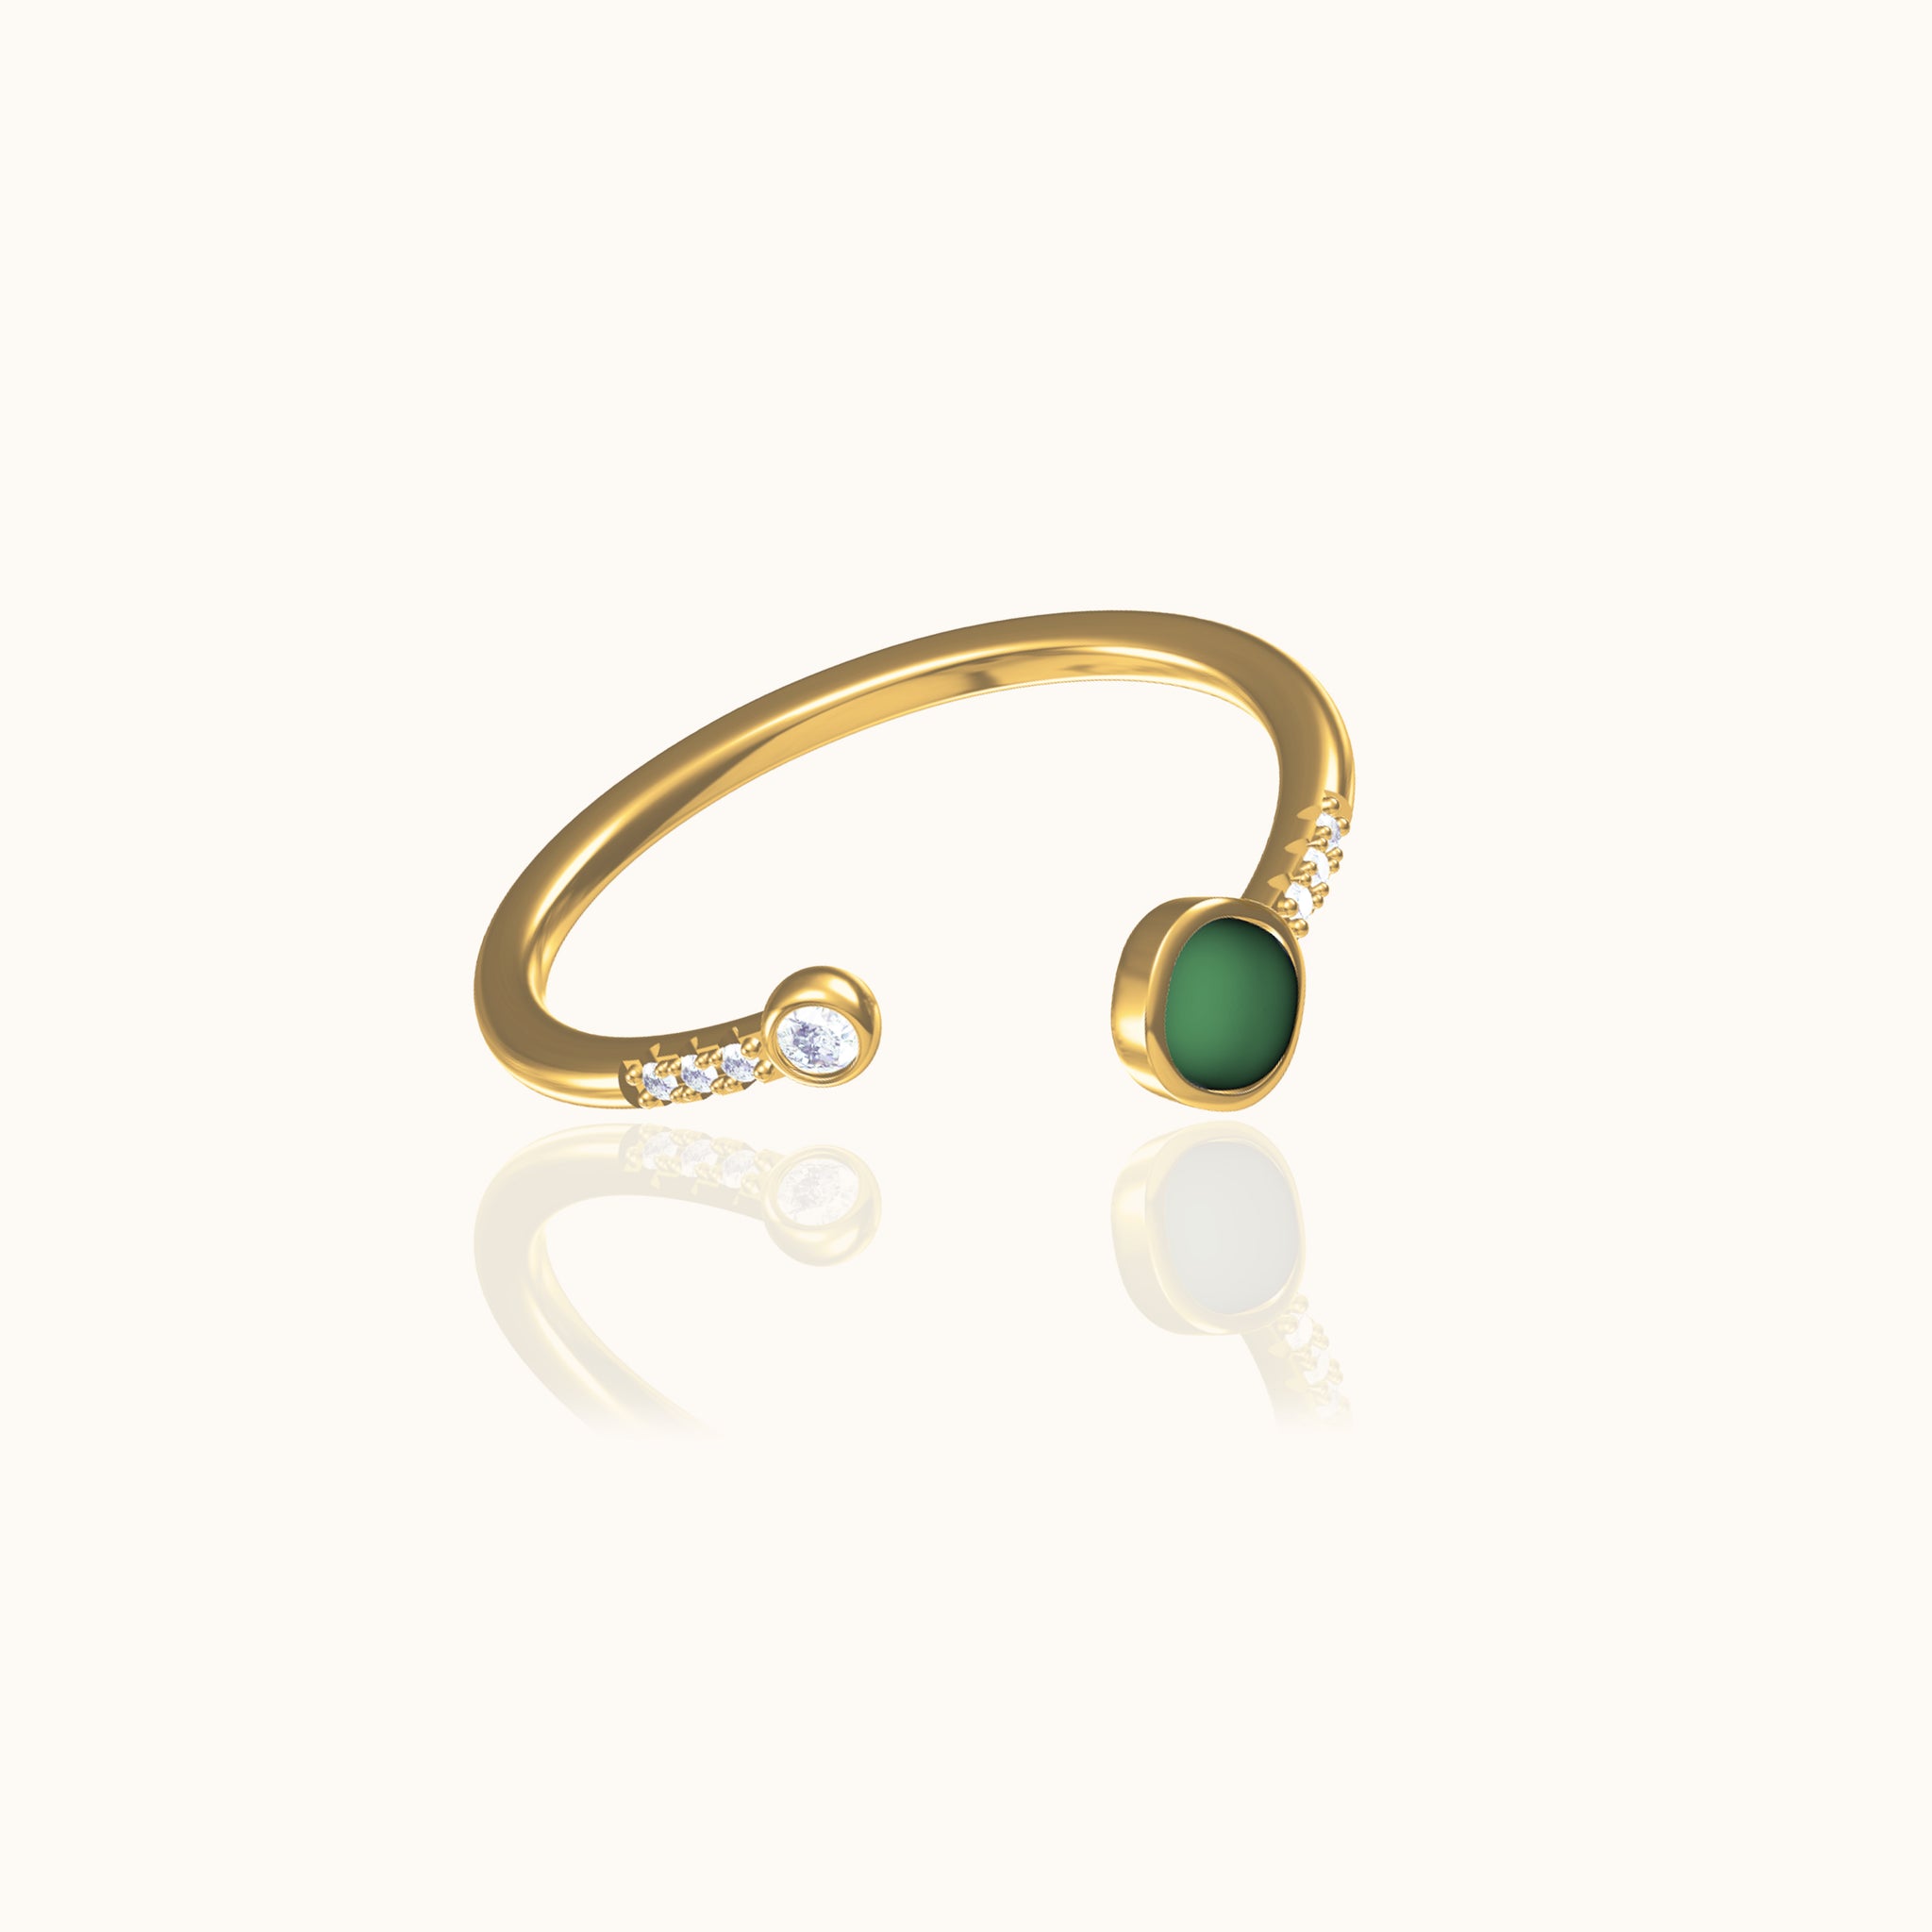 Gold Band Round Natural Green Jade Adjustable Genuine Jade Overlap Ring by Doviana